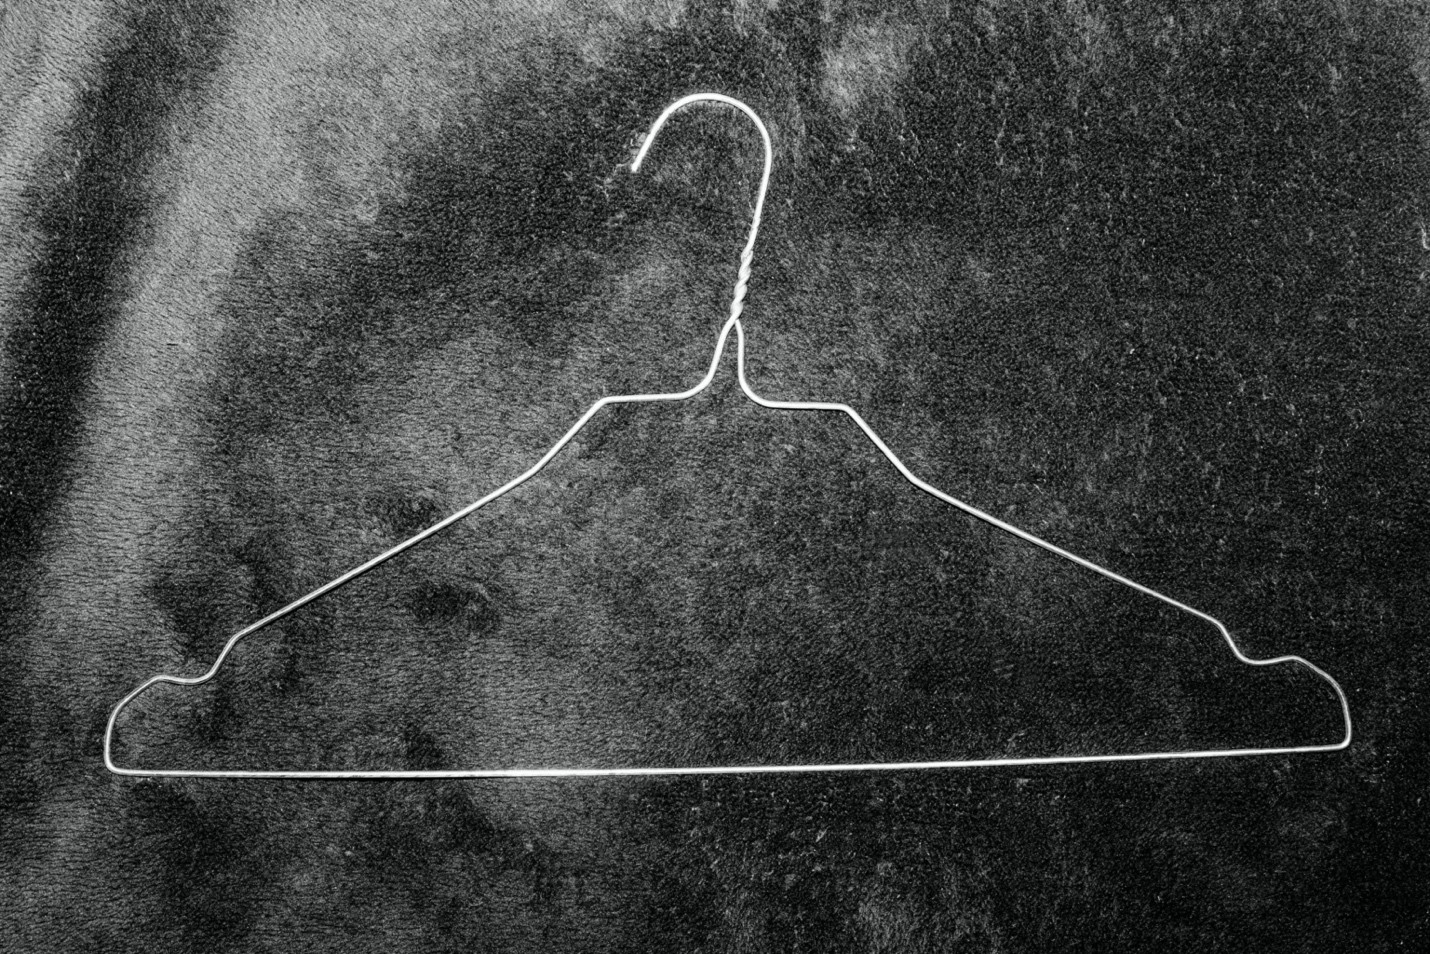 Black-and-white photographic image of a white wire coat hanger against a mottled dark background.